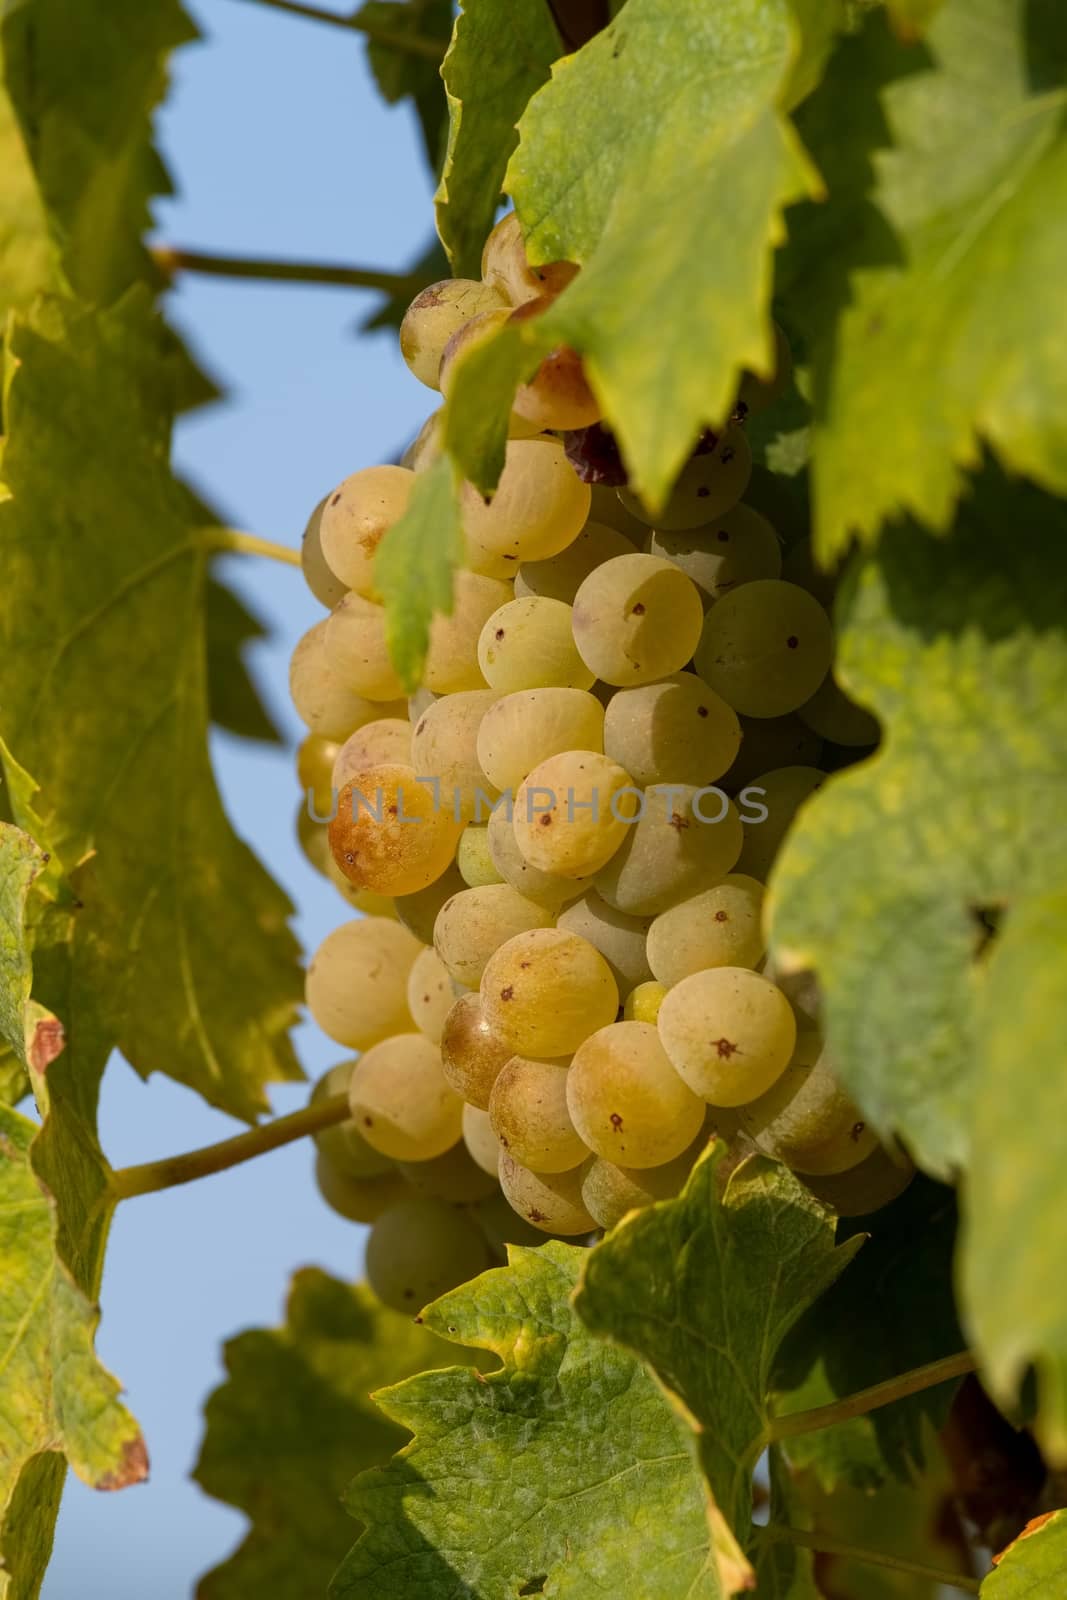 Tasty green Welschriesling grapes by Digoarpi